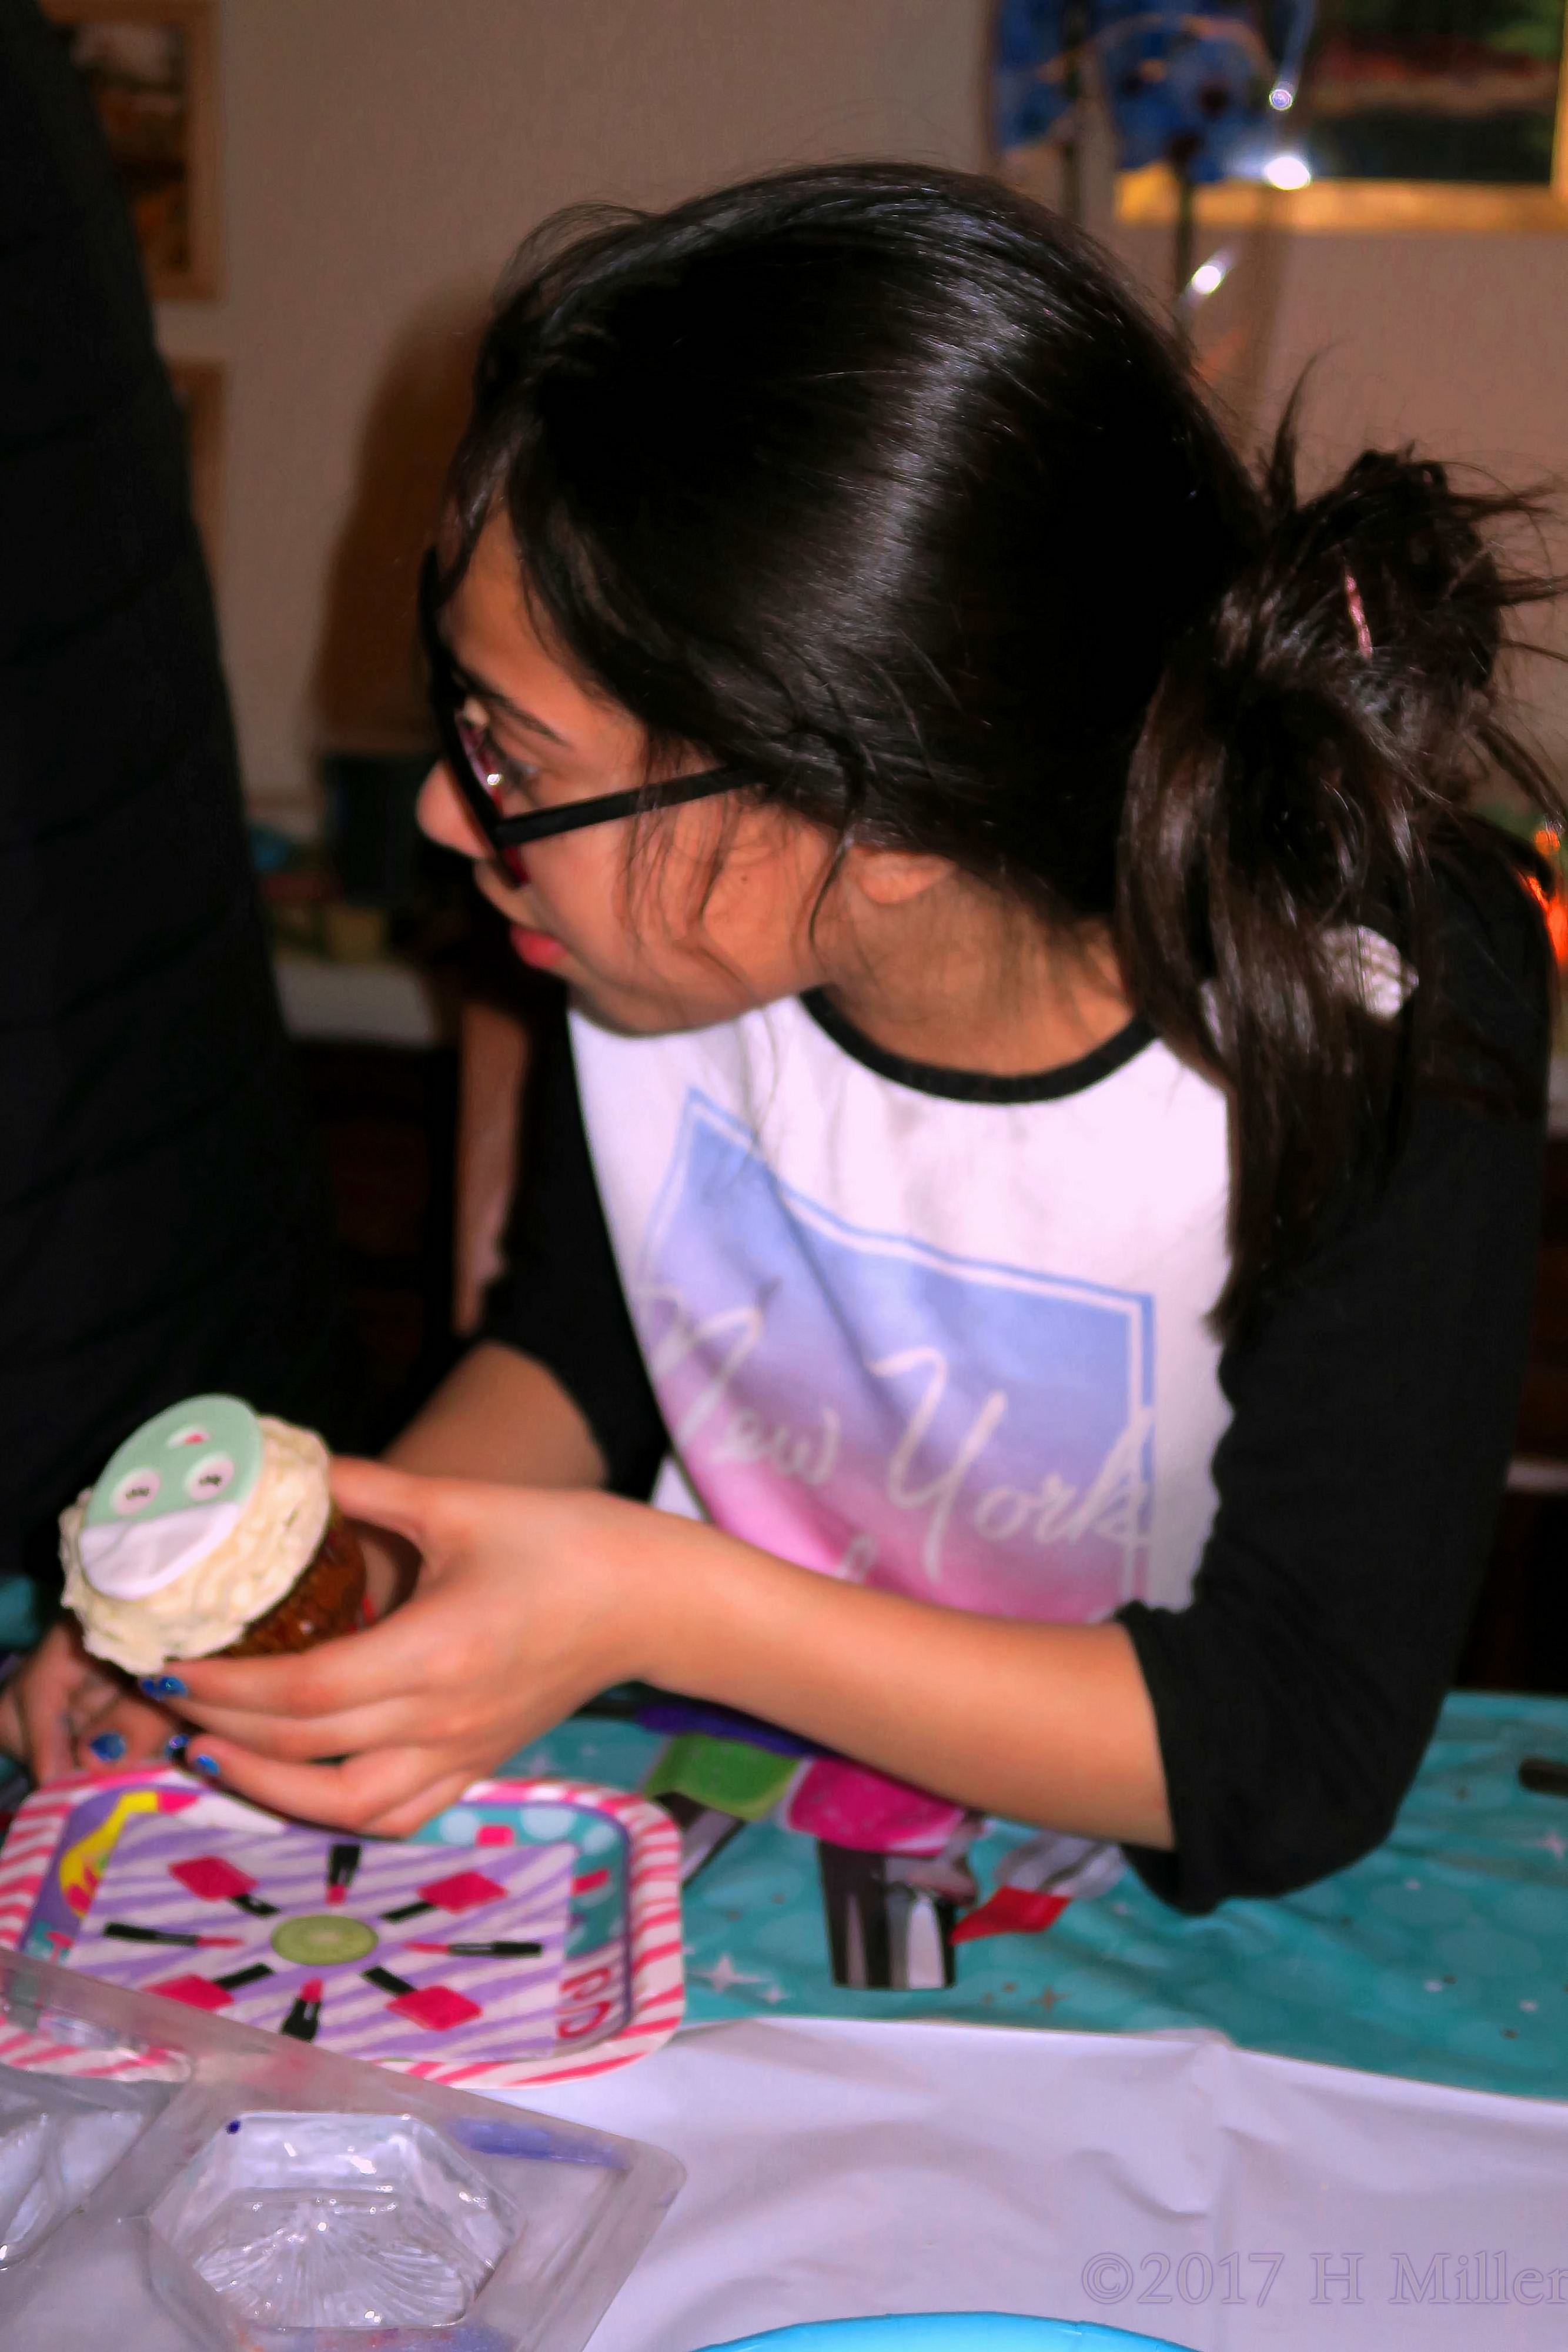 Party Guest Getting Ready To Enjoy Her Cupcake 